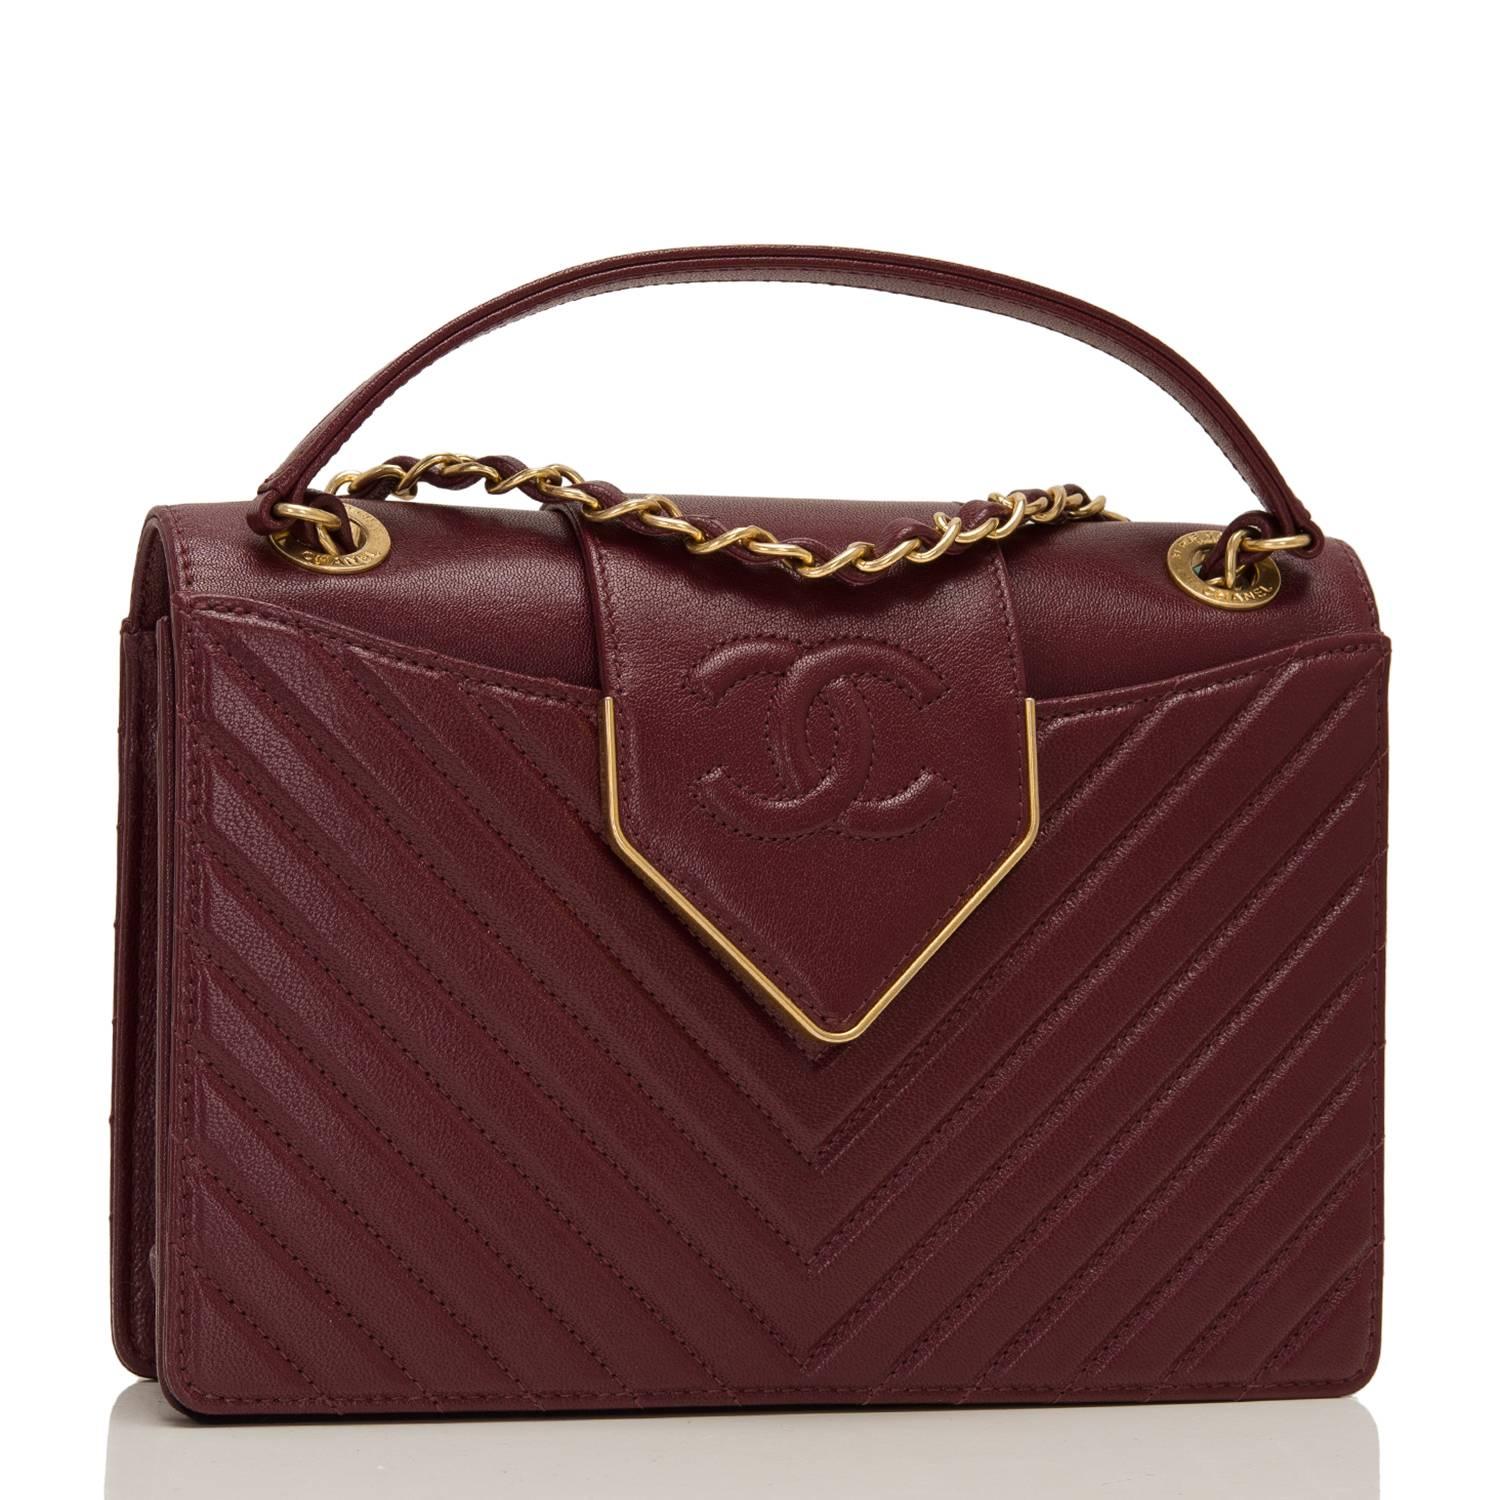 Chanel Paris In Rome burgundy quilted sheepskin flap bag with antique gold tone hardware.

This limited edition bag in a quilted chevron pattern with smooth leather on sides, top and bottom has front and back pockets, a front leather CC and gold